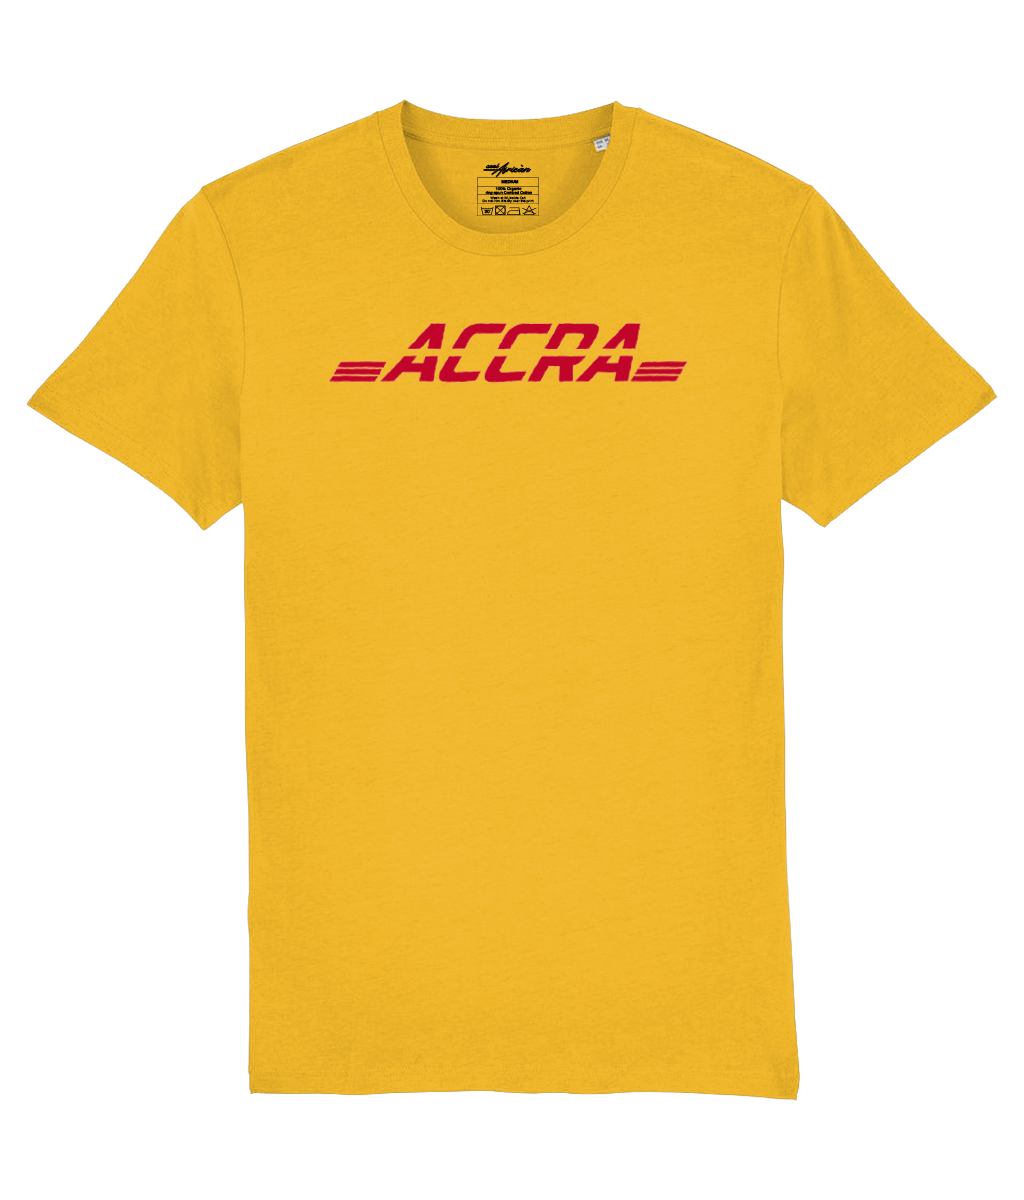 Accra T-Shirt - CoolAfricanMerch